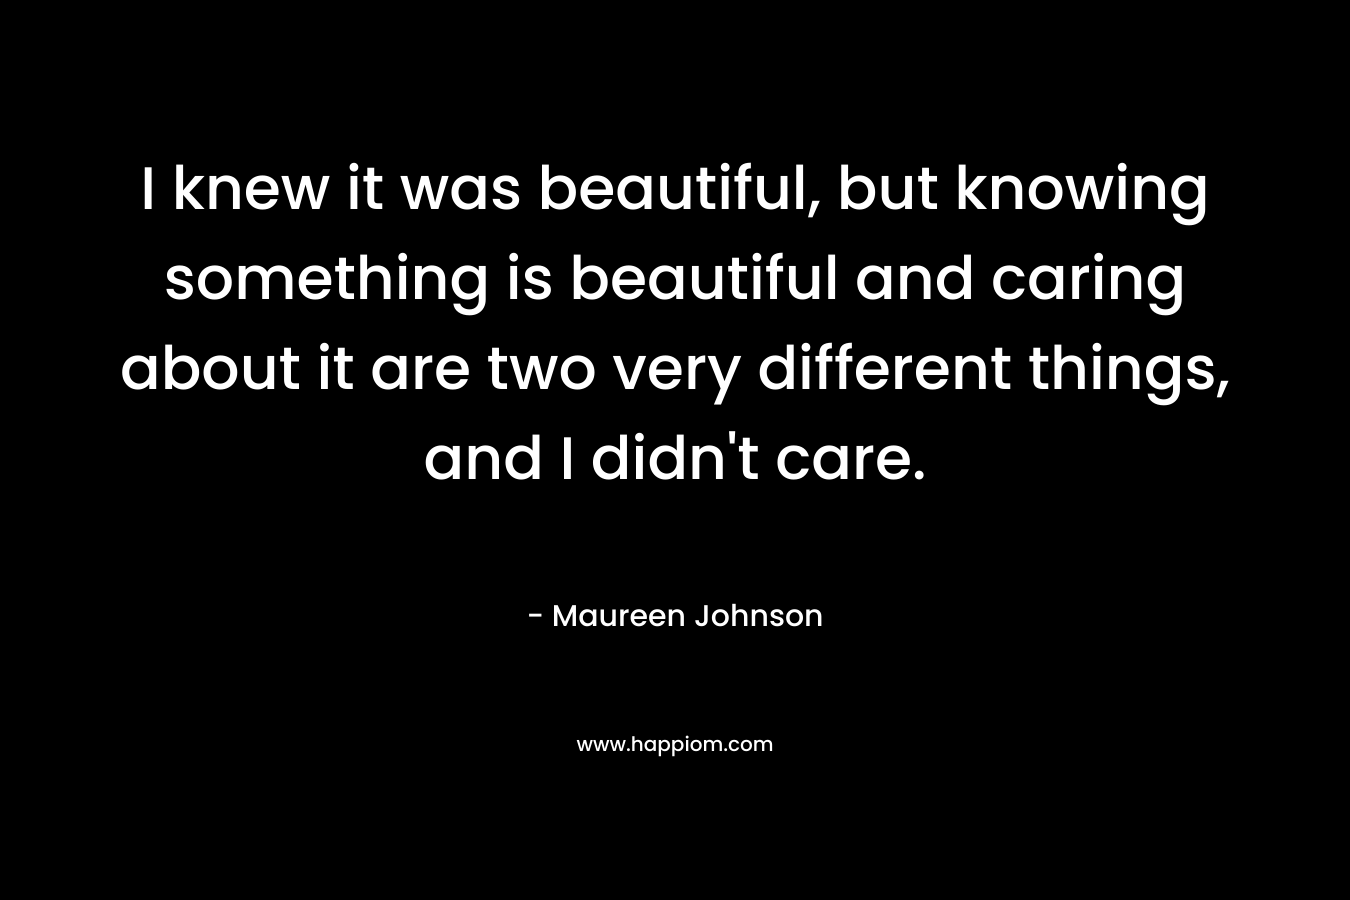 I knew it was beautiful, but knowing something is beautiful and caring about it are two very different things, and I didn’t care. – Maureen Johnson